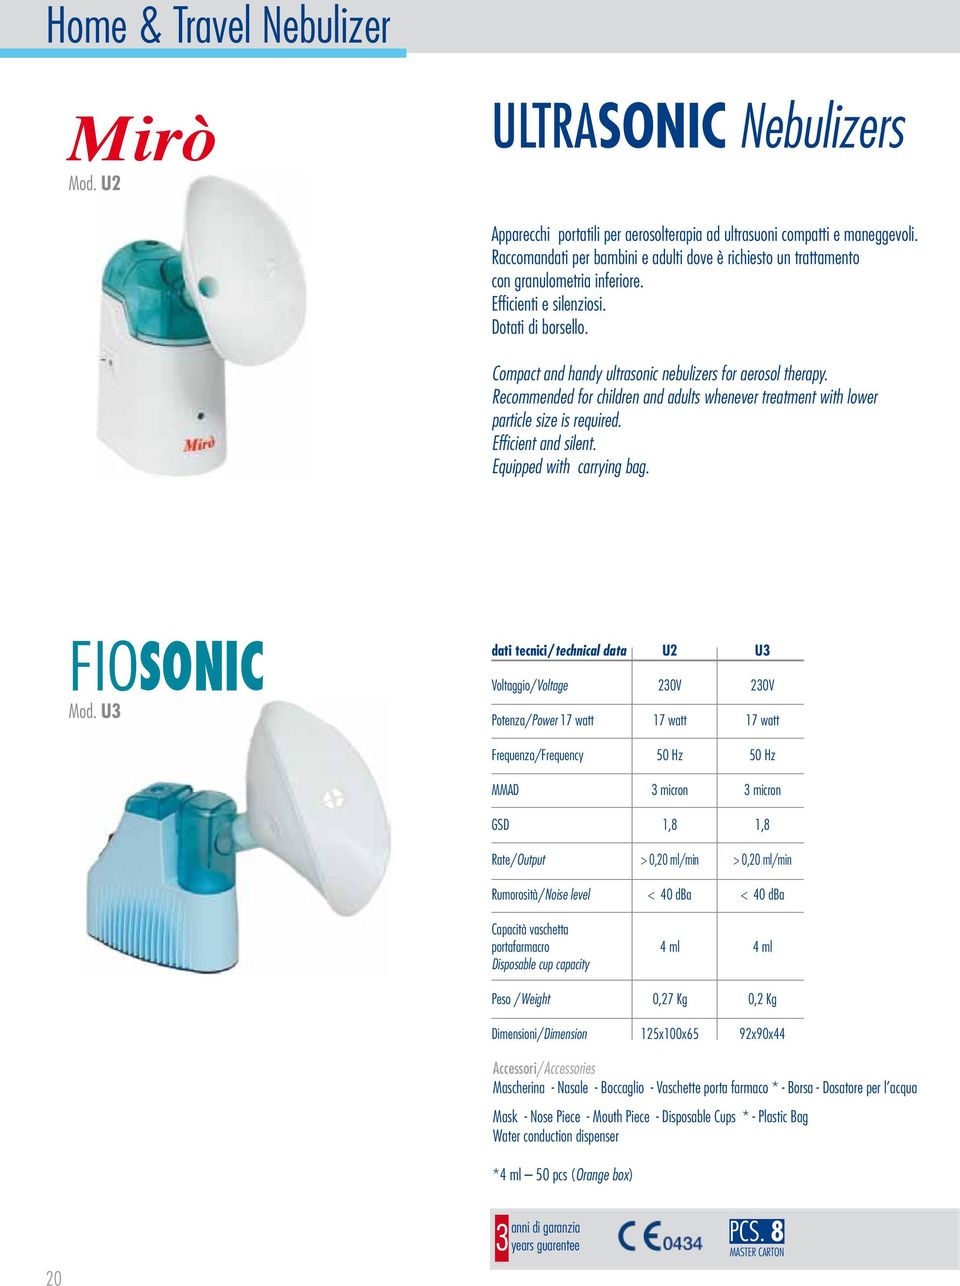 Recommended for children and adults whenever treatment with lower particle size is required. Efficient and silent. Equipped with carrying bag. Fiosonic Mod.